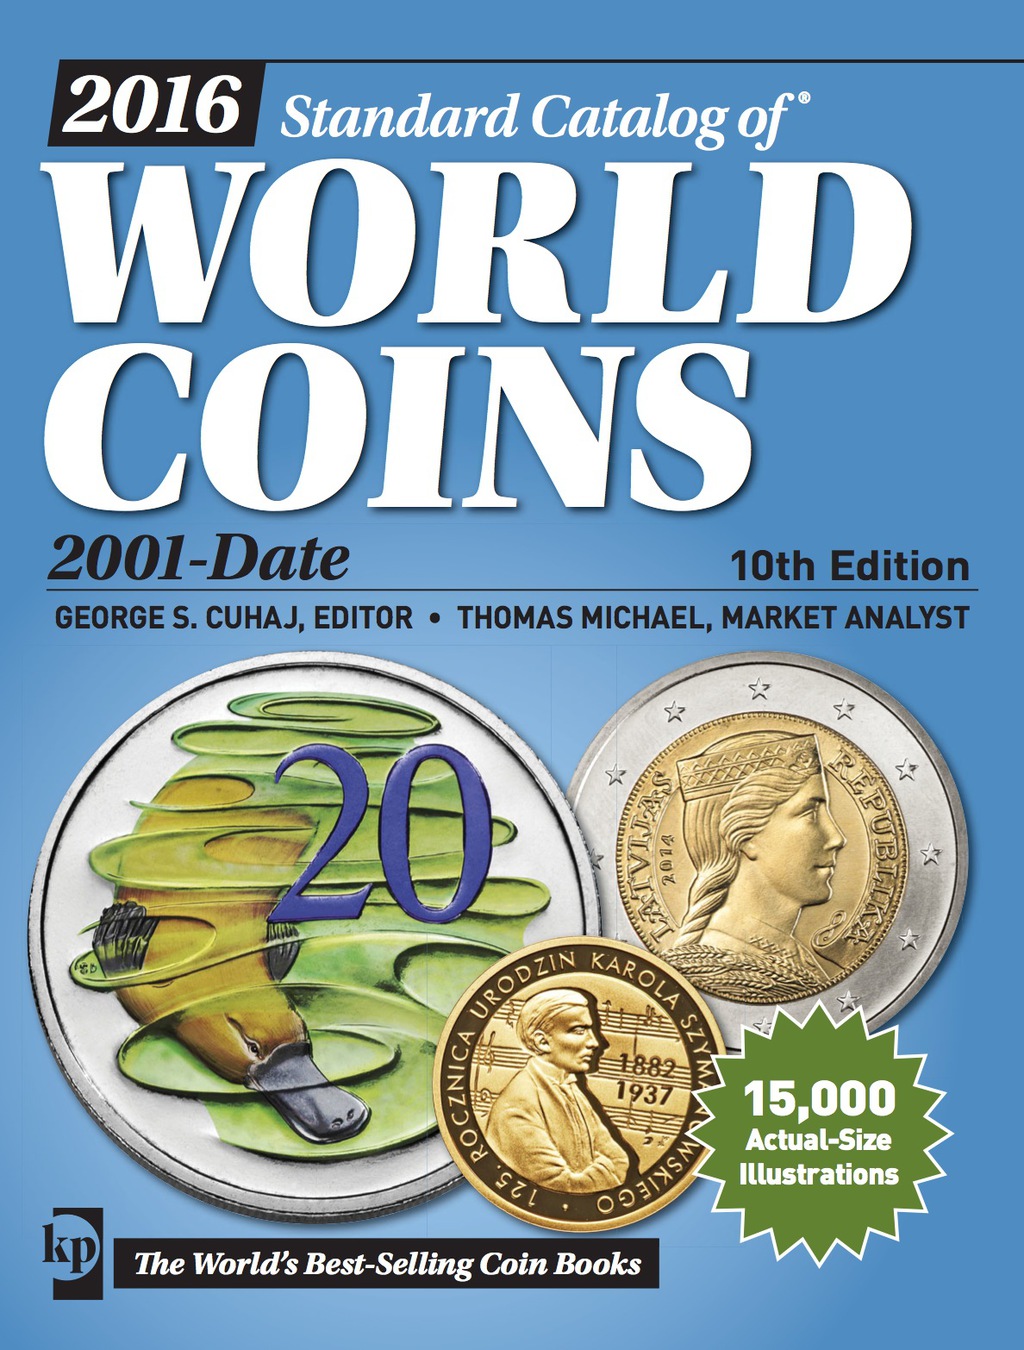 2016 Standard Catalog of World Coins 2001-Date - 10th Edition (eBook)